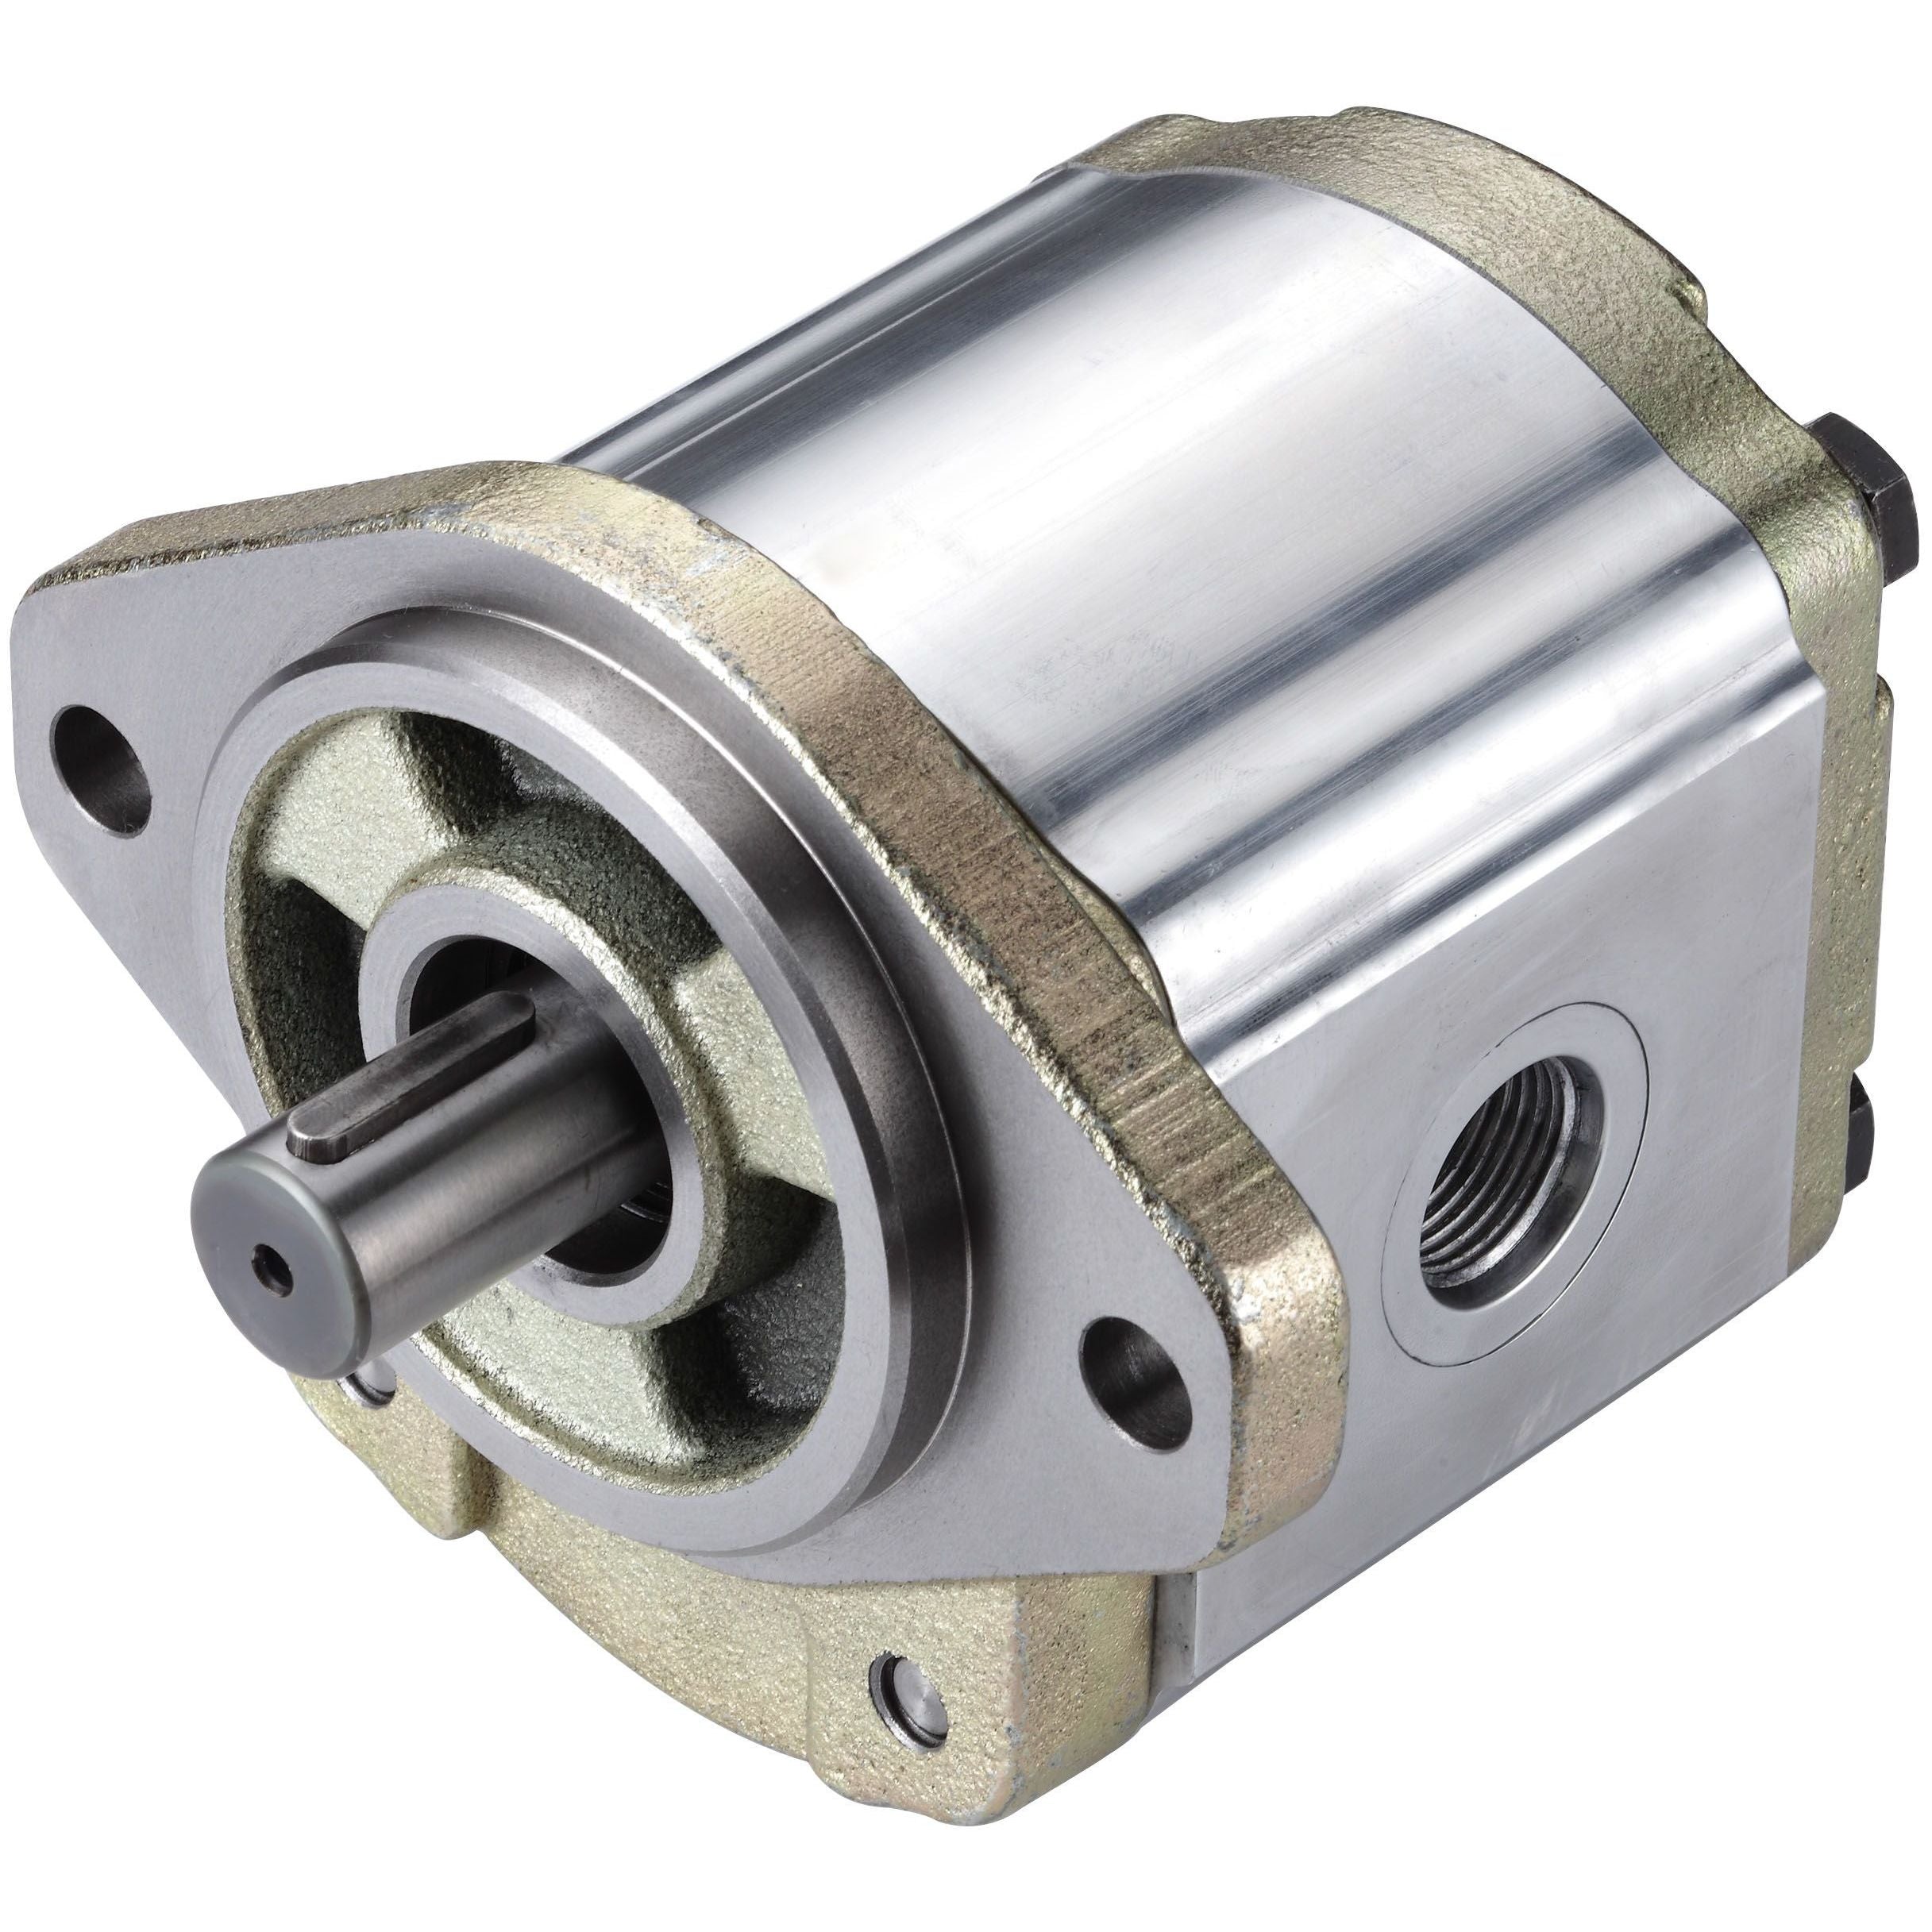 3GA5ZU125R : Honor Gear Pump, CW Rotation, 25cc (1.53in3), 11.89 GPM, 3500psi, 3000 RPM, #16 SAE (1") In, #12 SAE (3/4") Out, Splined Shaft 11-Tooth, 16/32 Pitch, SAE A 2-Bolt Mount